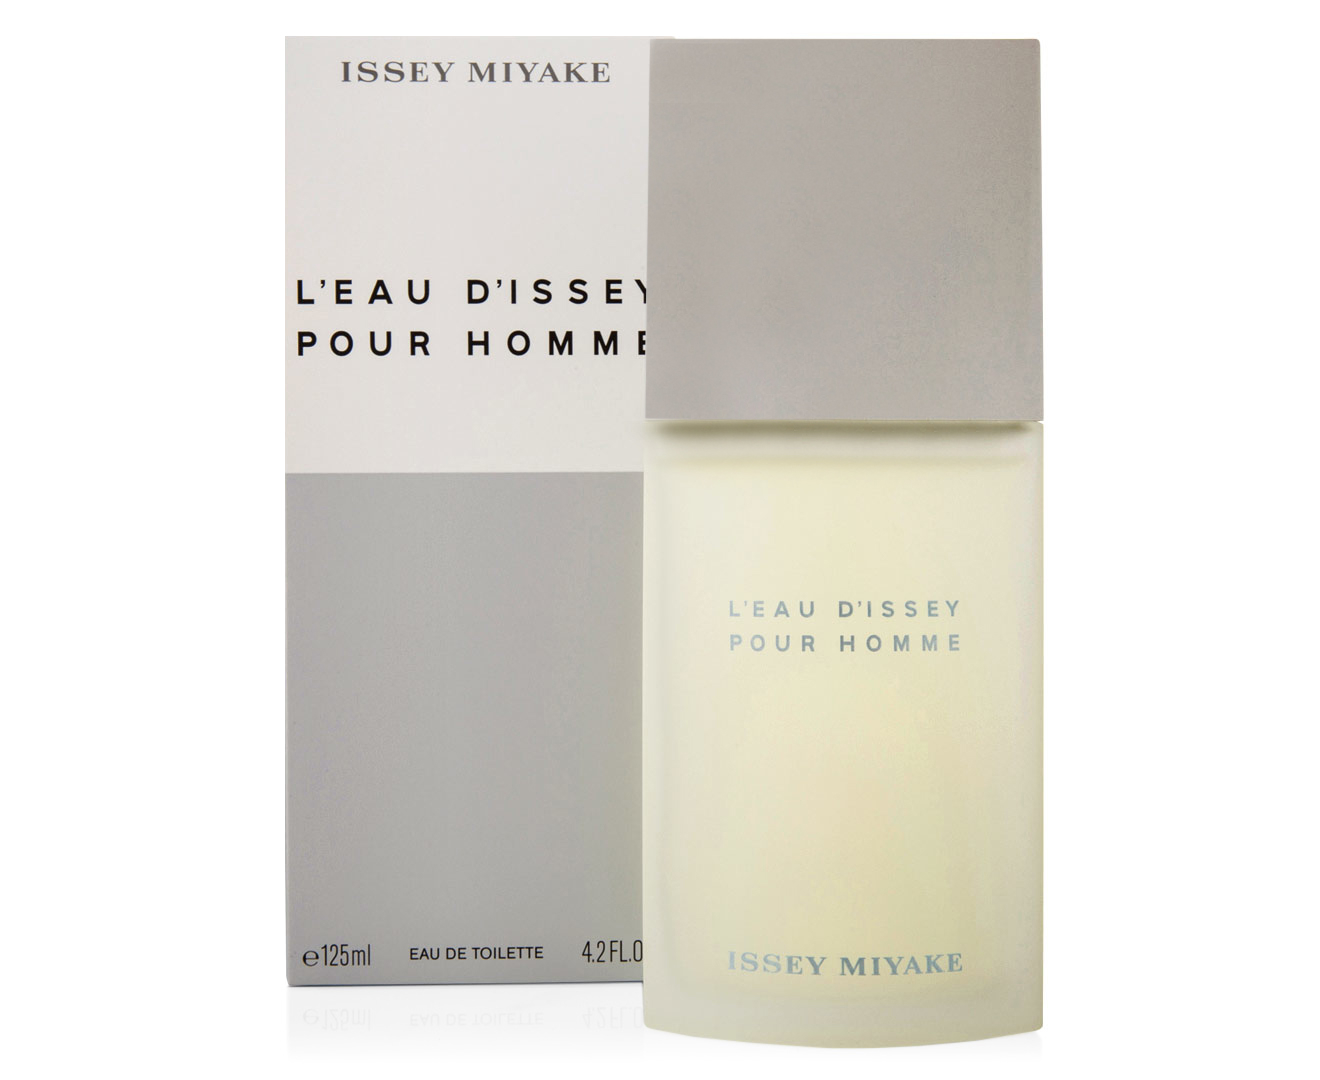 Issey Miyake L'Eau D'Issey Pour Homme for Men EDT Perfume 125mL | Catch ...